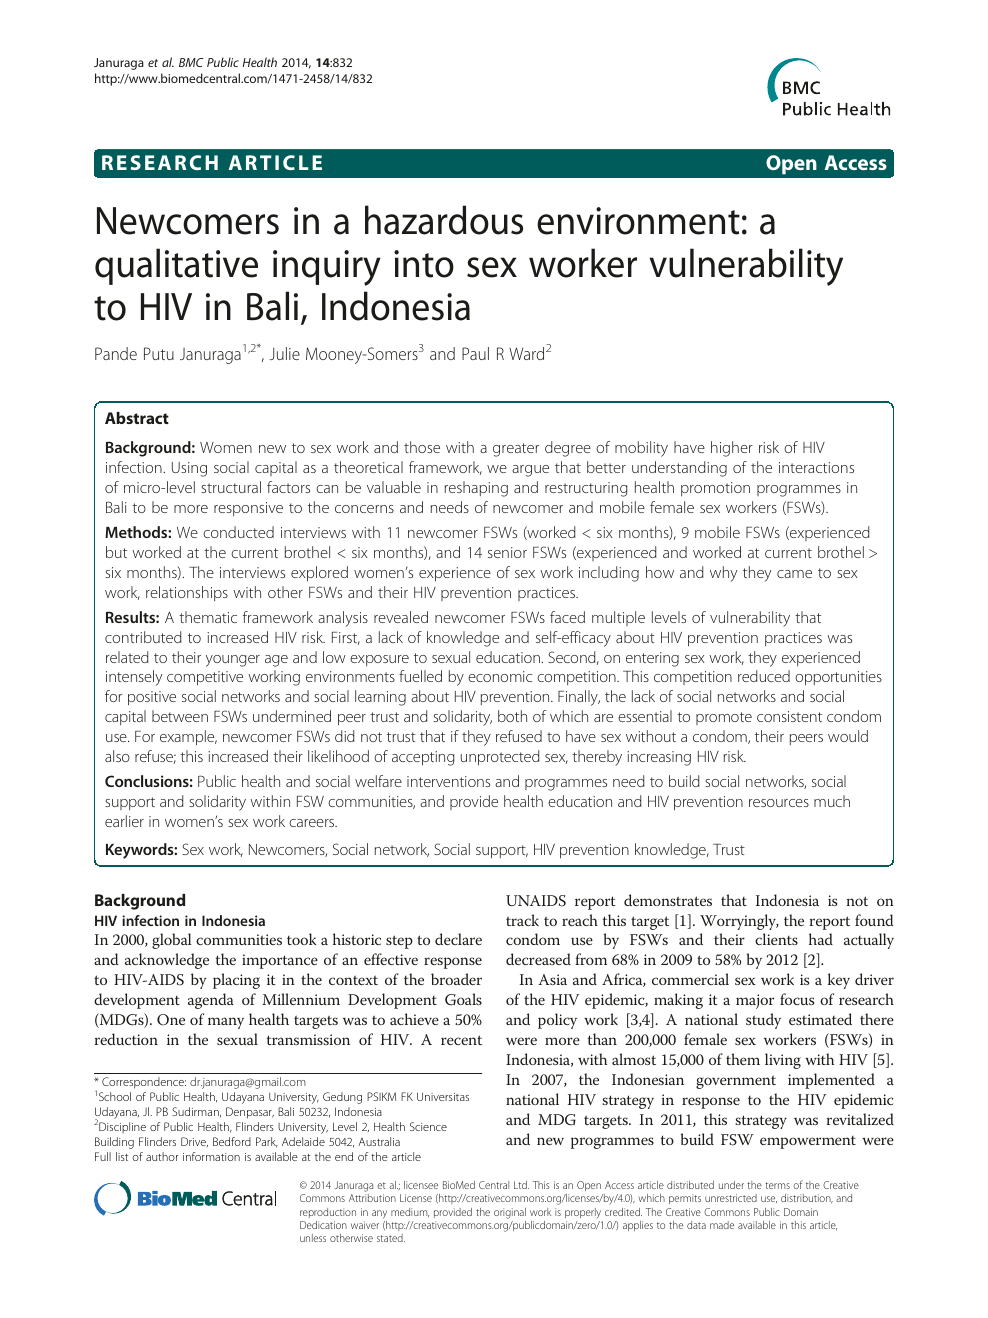 Newcomers in a hazardous environment a qualitative inquiry into sex worker vulnerability to HIV in Bali, Indonesia